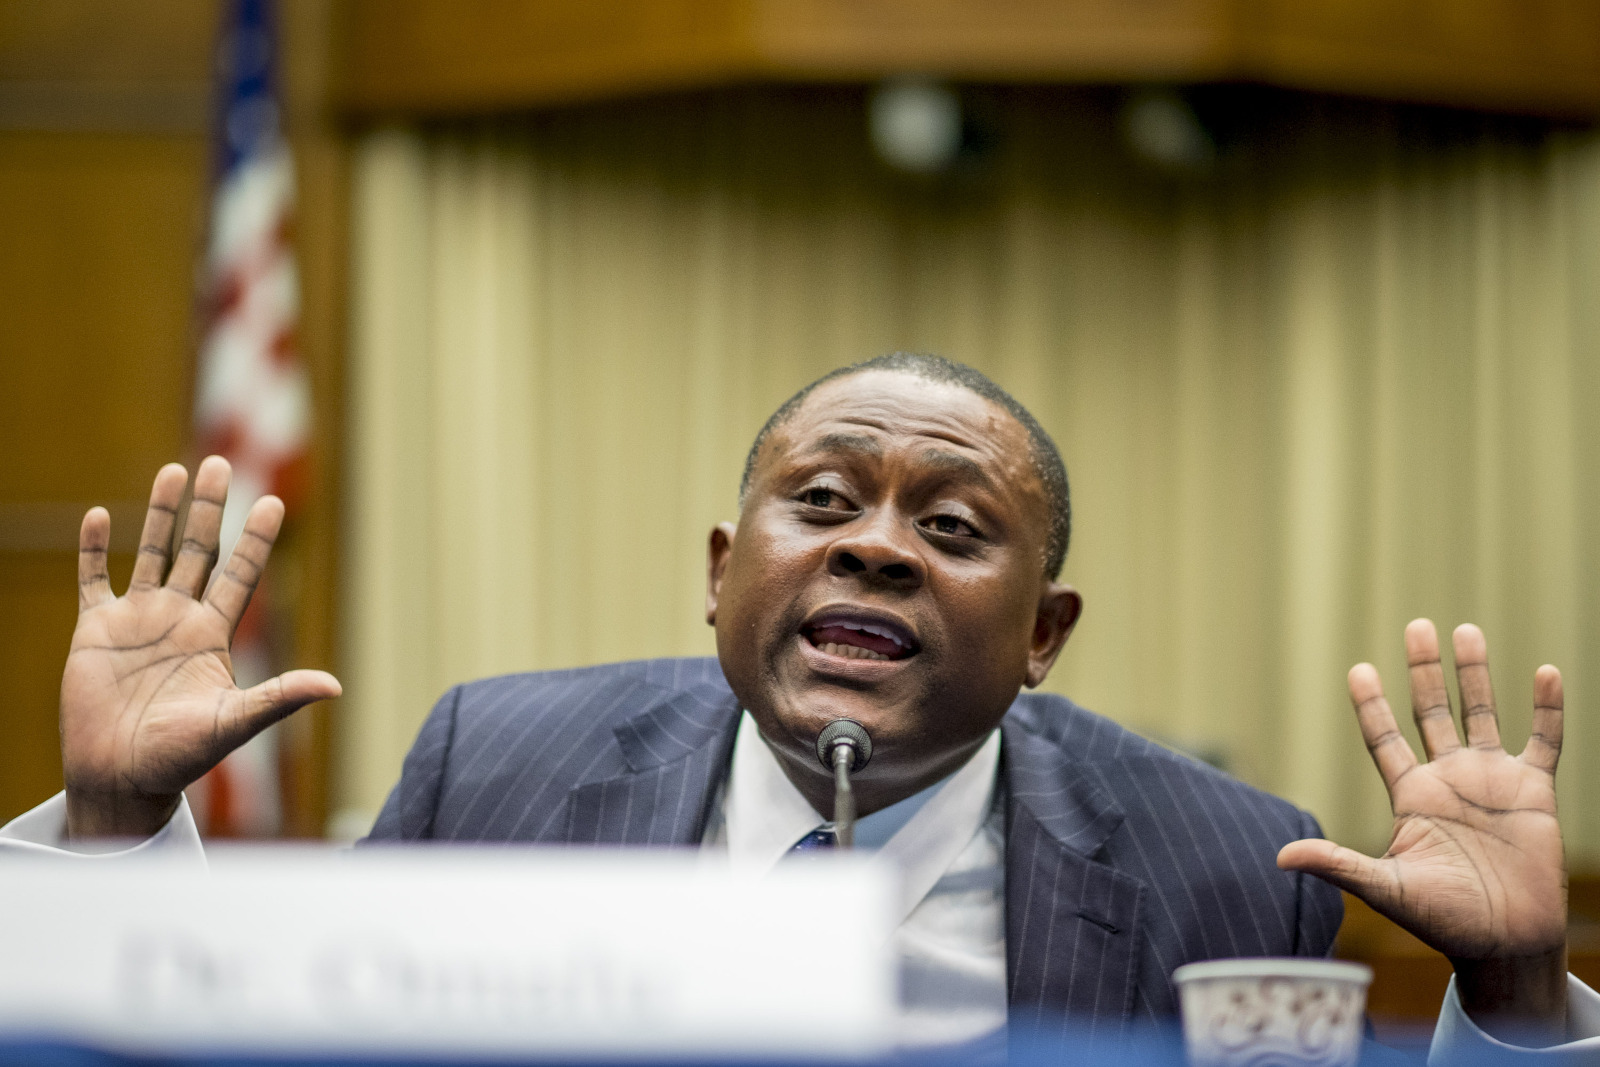 Bennet Omalu: The True Superhero who Fought the NFL and Won